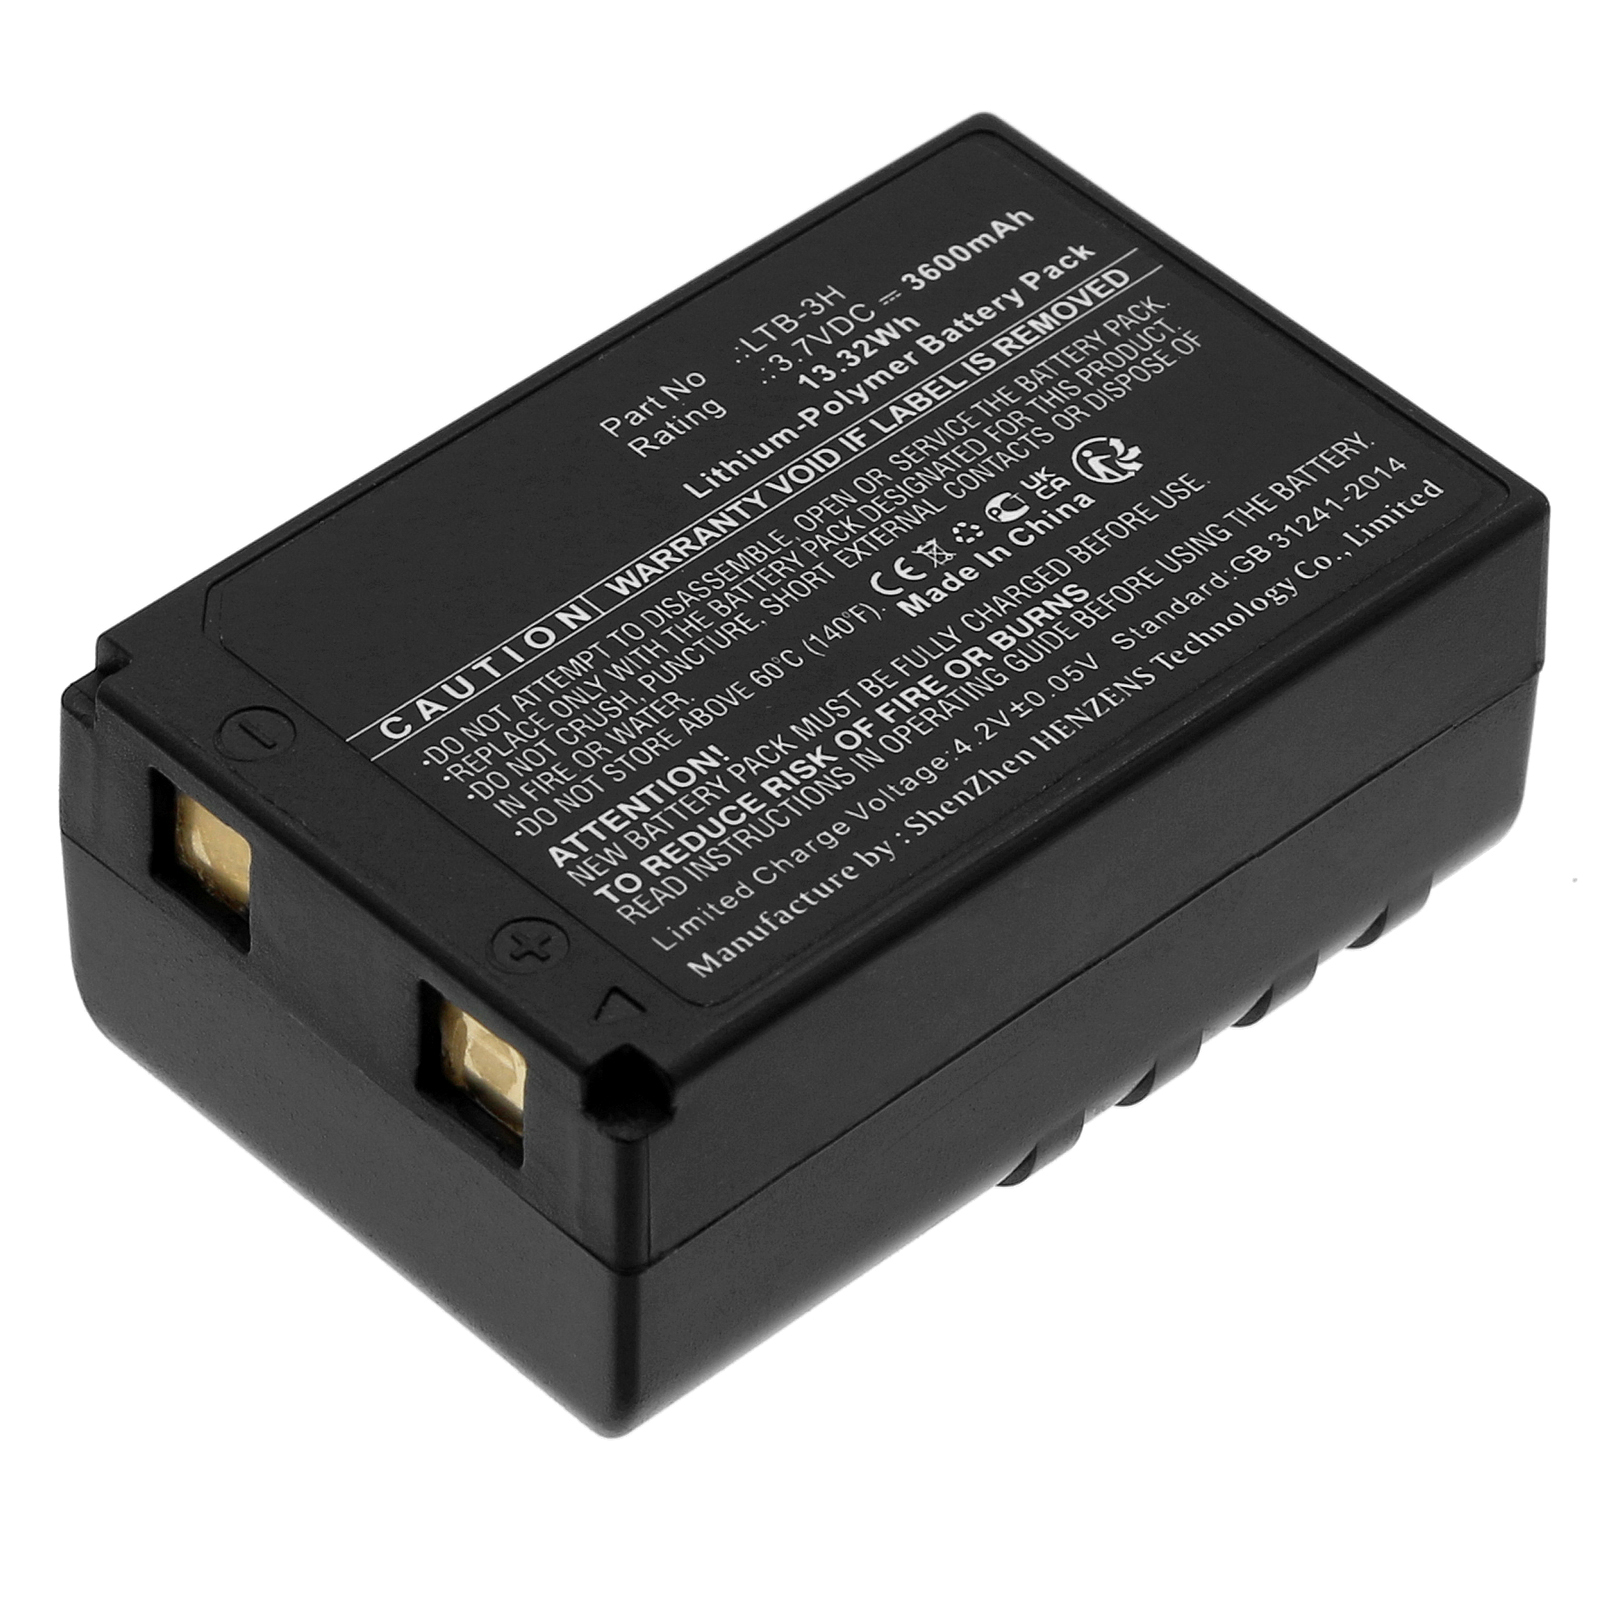 Synergy Digital Equipment Battery, Compatible with KDS LTB-3H Equipment Battery (Li-Pol, 3.7V, 3600mAh)